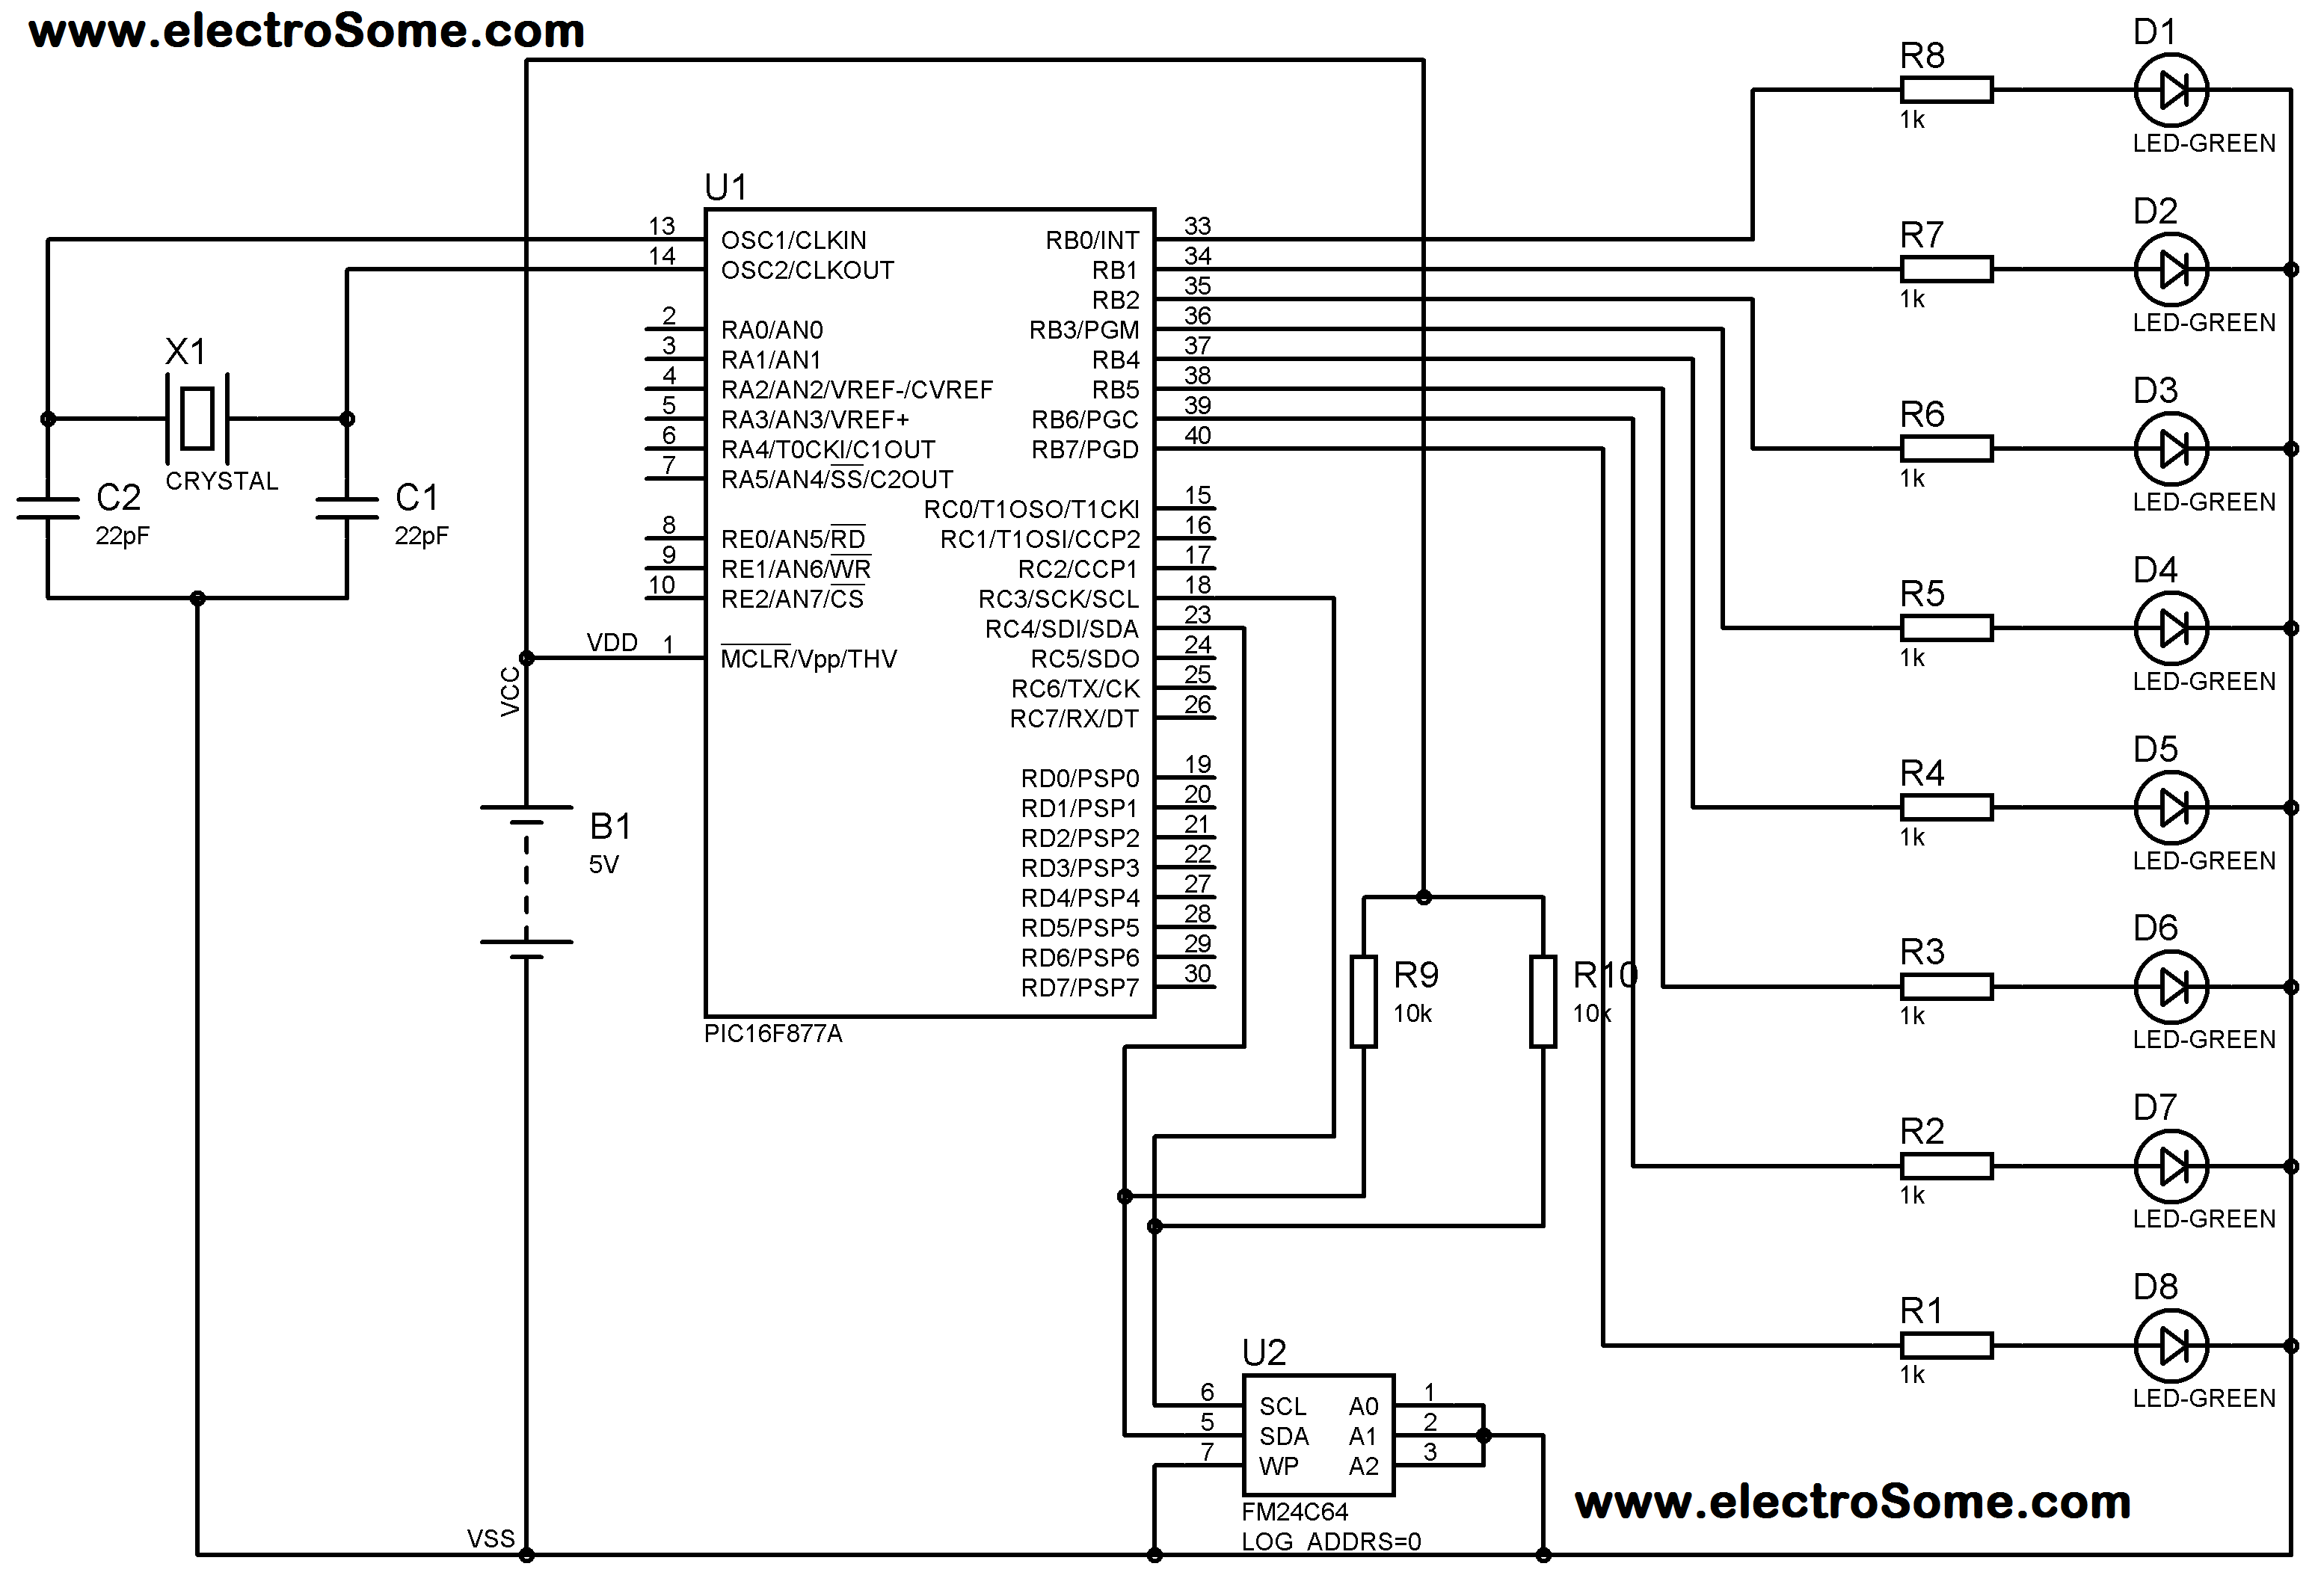 Interfacing External EEPROM with PIC Microcontroller